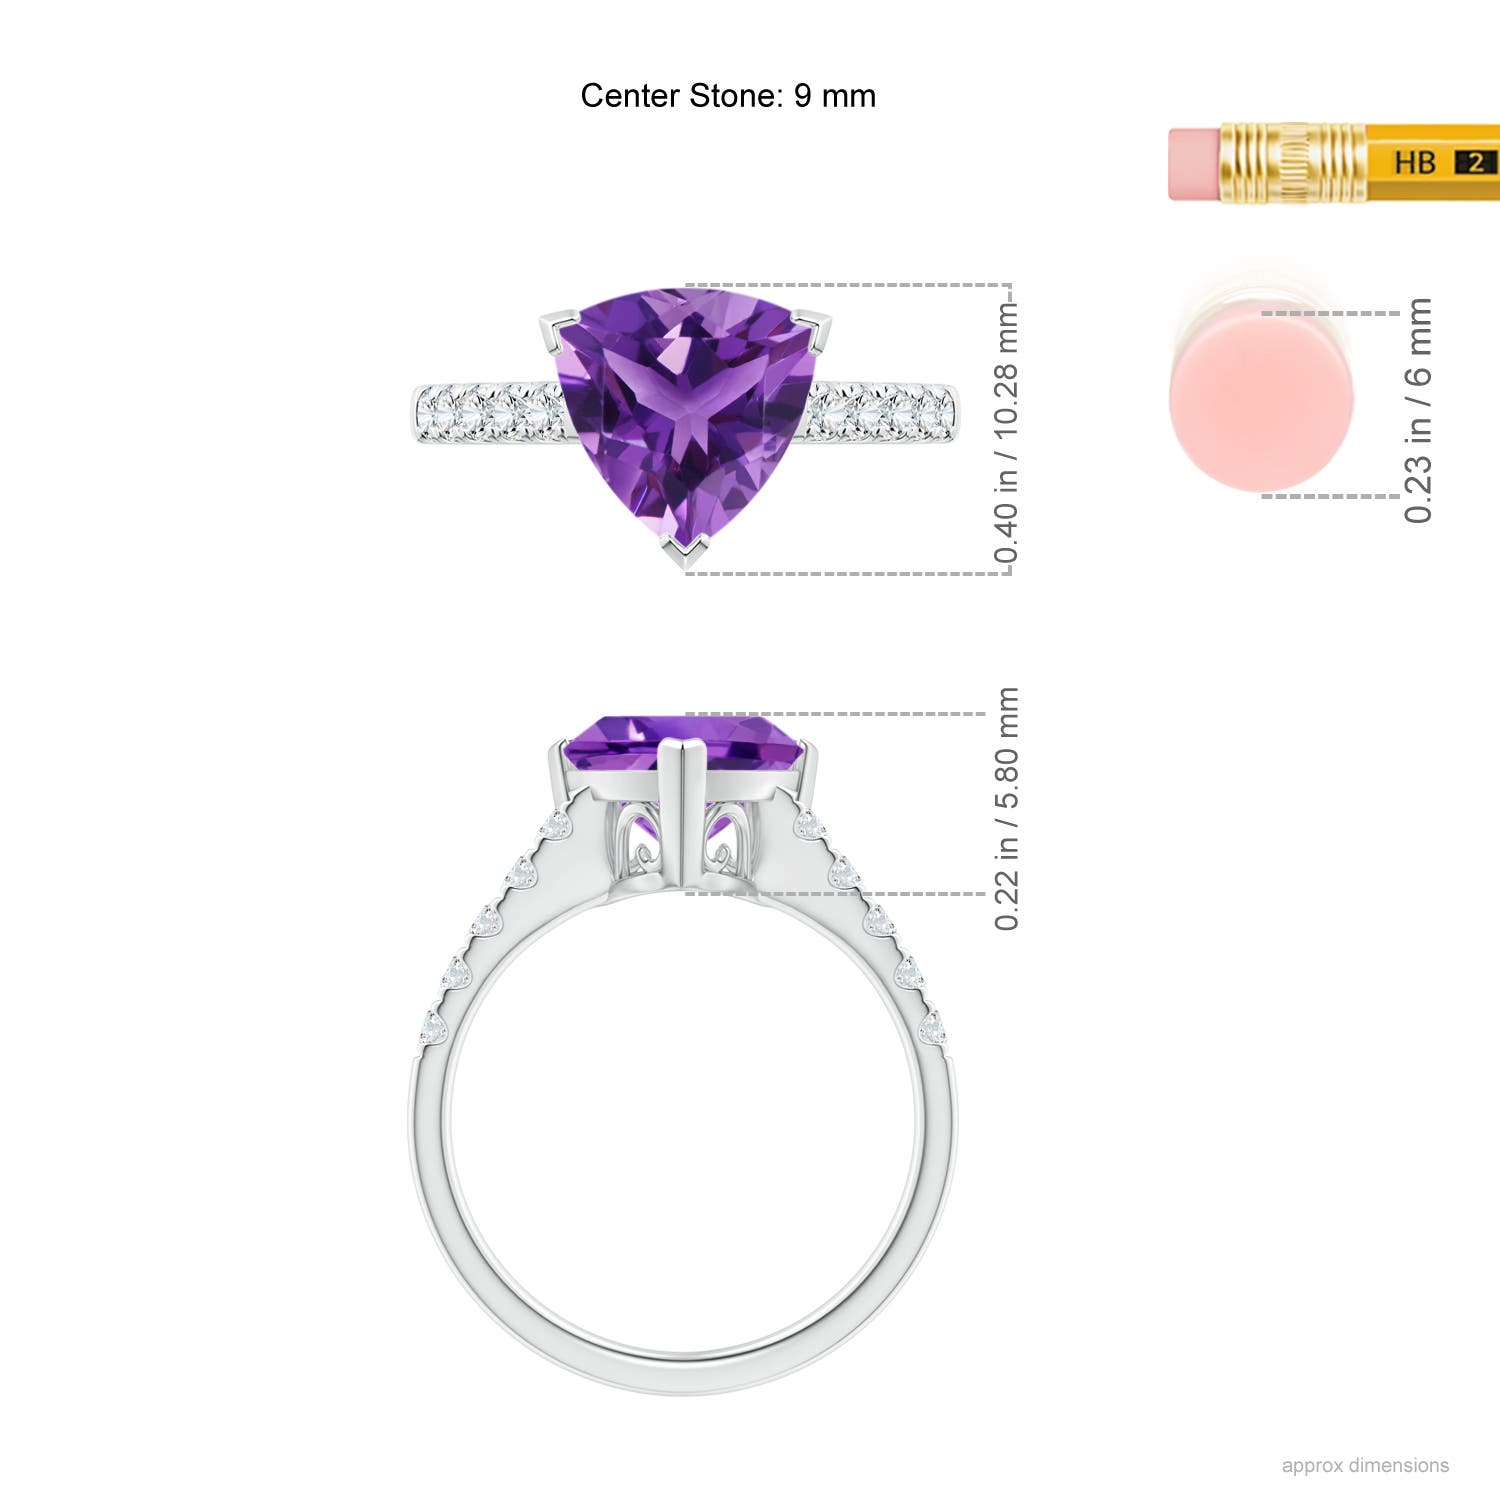 AAA - Amethyst / 2.53 CT / 14 KT White Gold